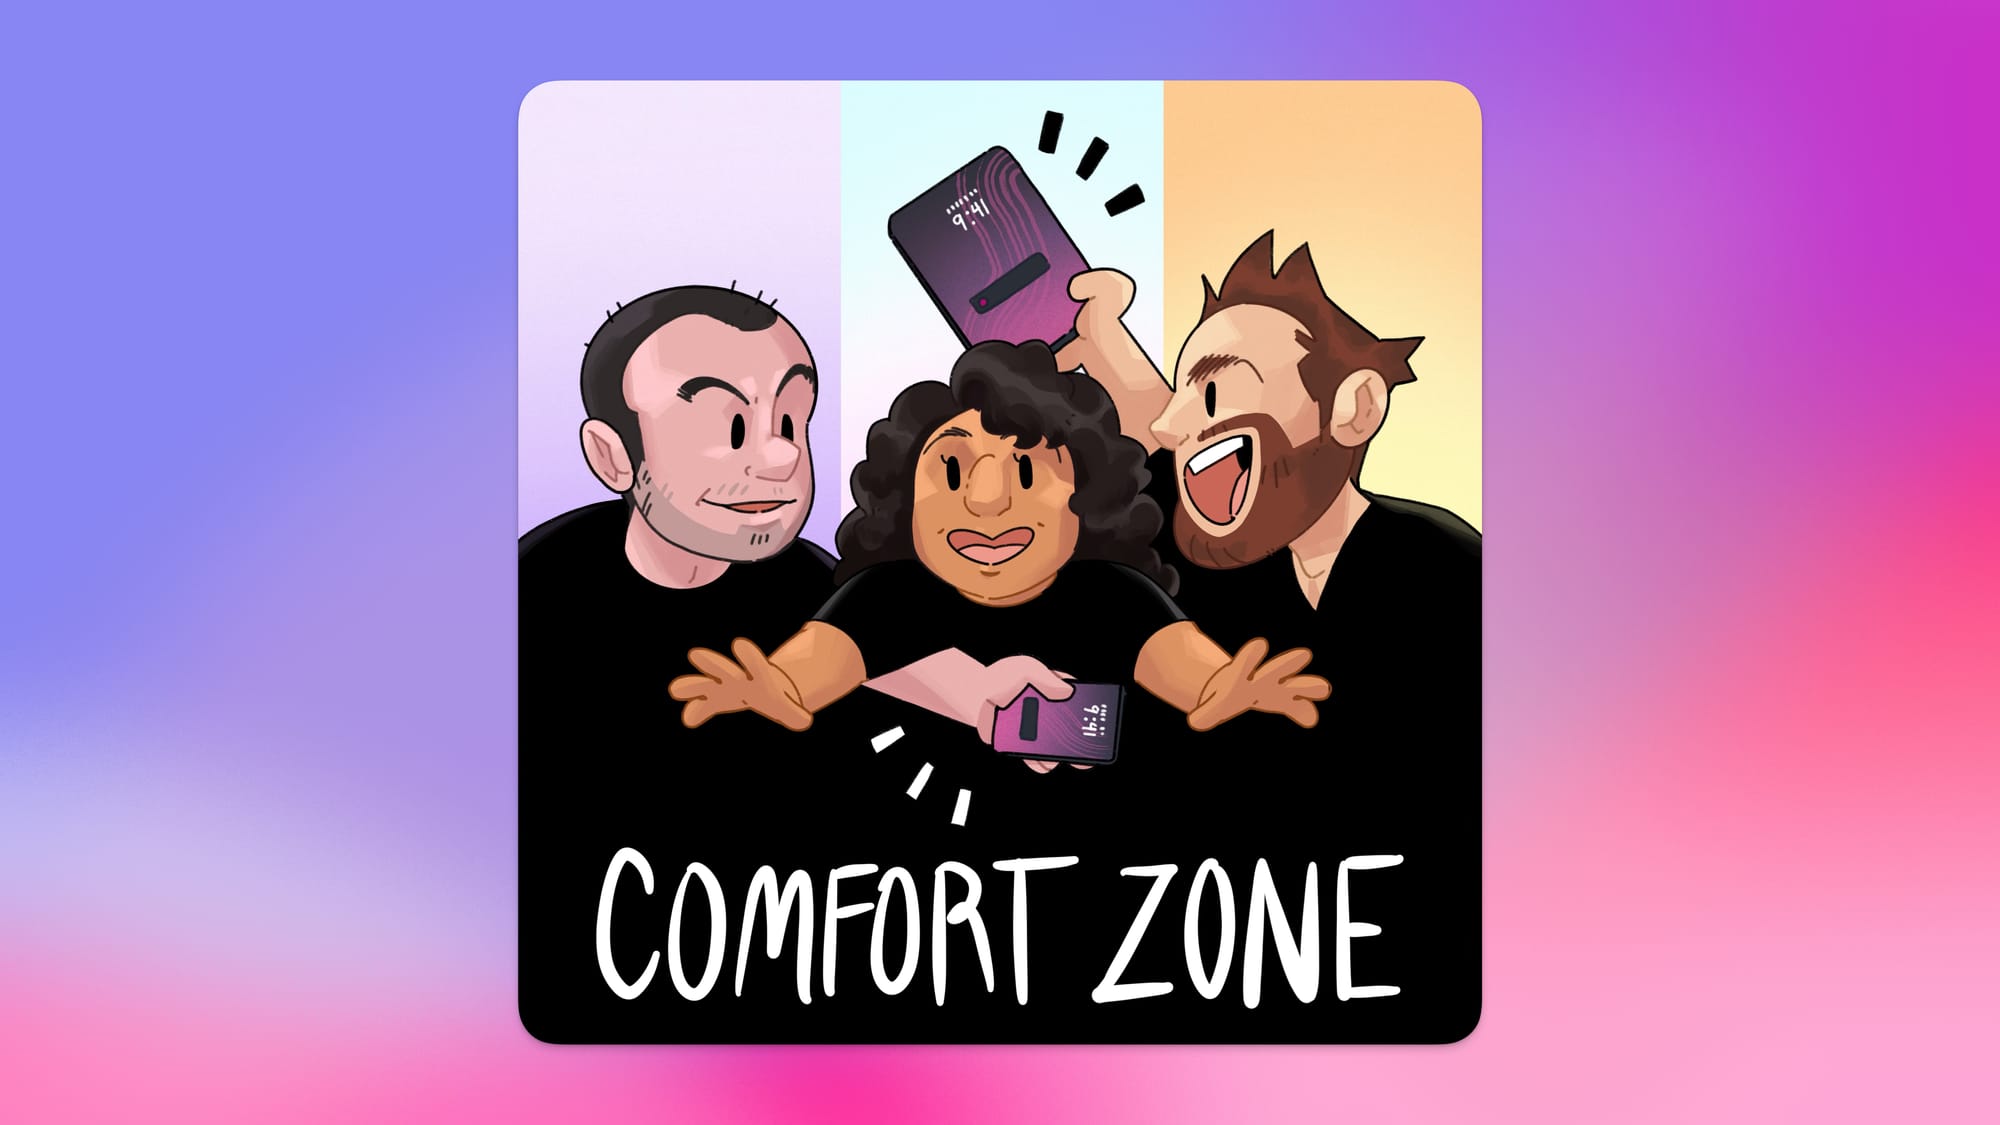 Welcome to Comfort Zone!